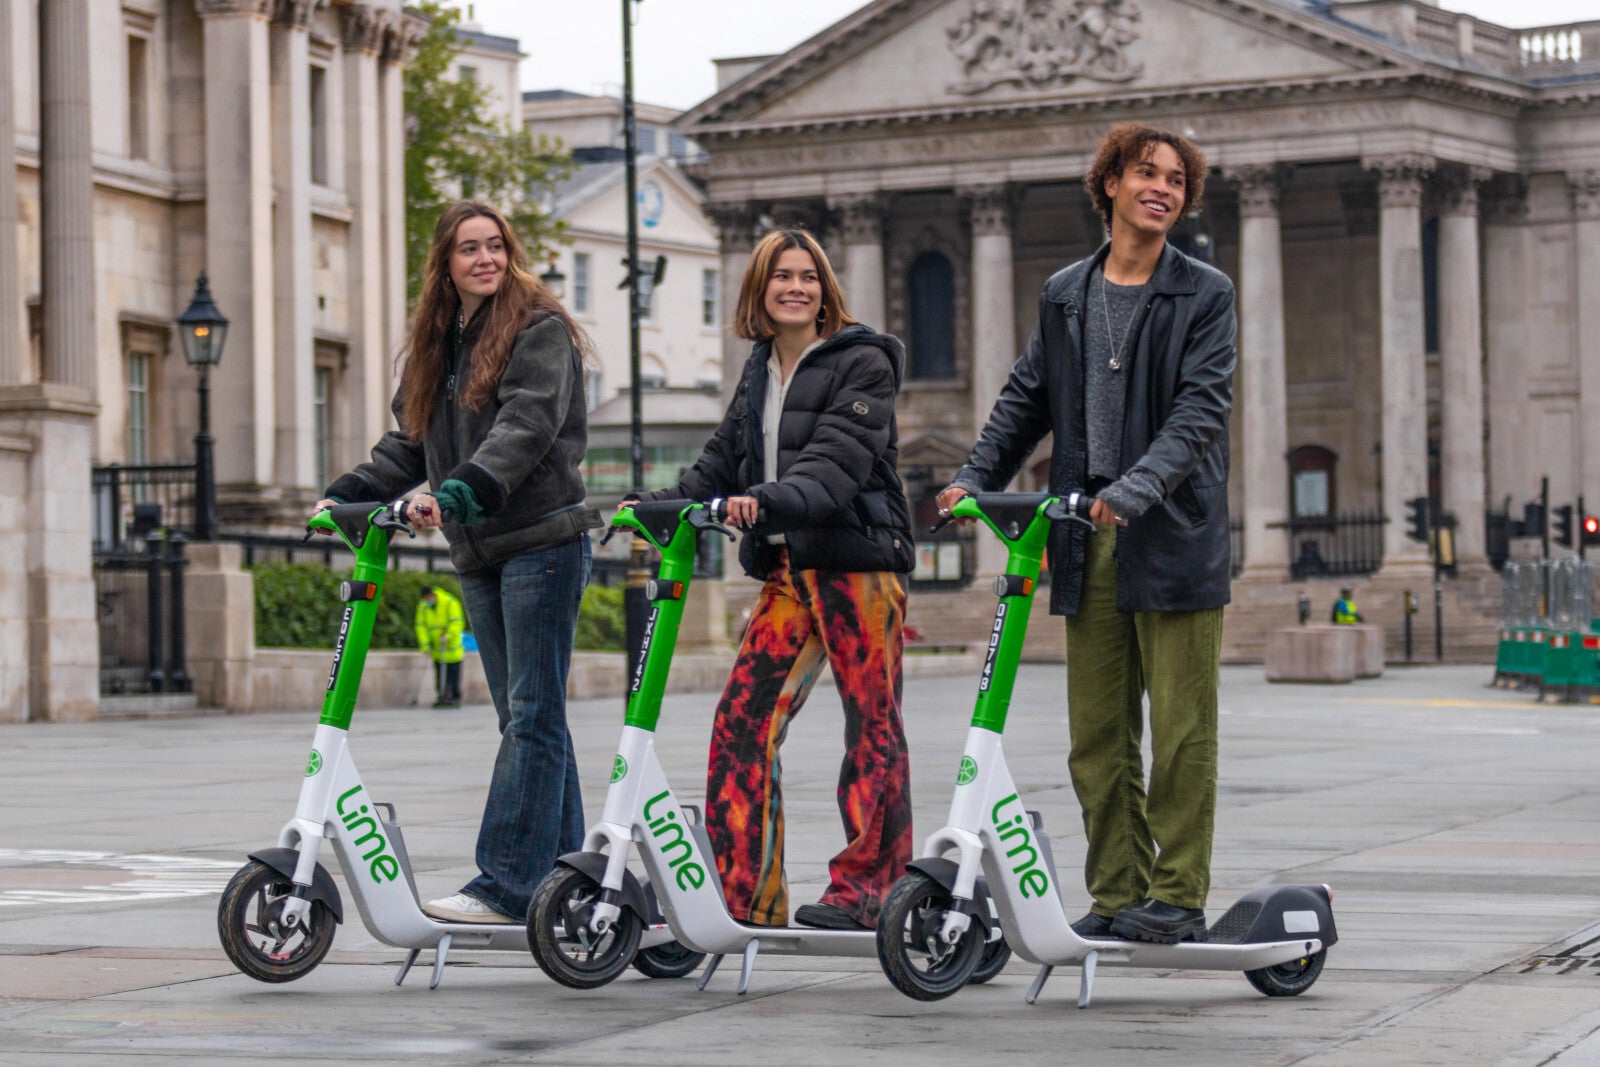 Competing micromobility company Lime can already be seen on Google Maps - Google Maps integrates new e-bike, scooter rentals